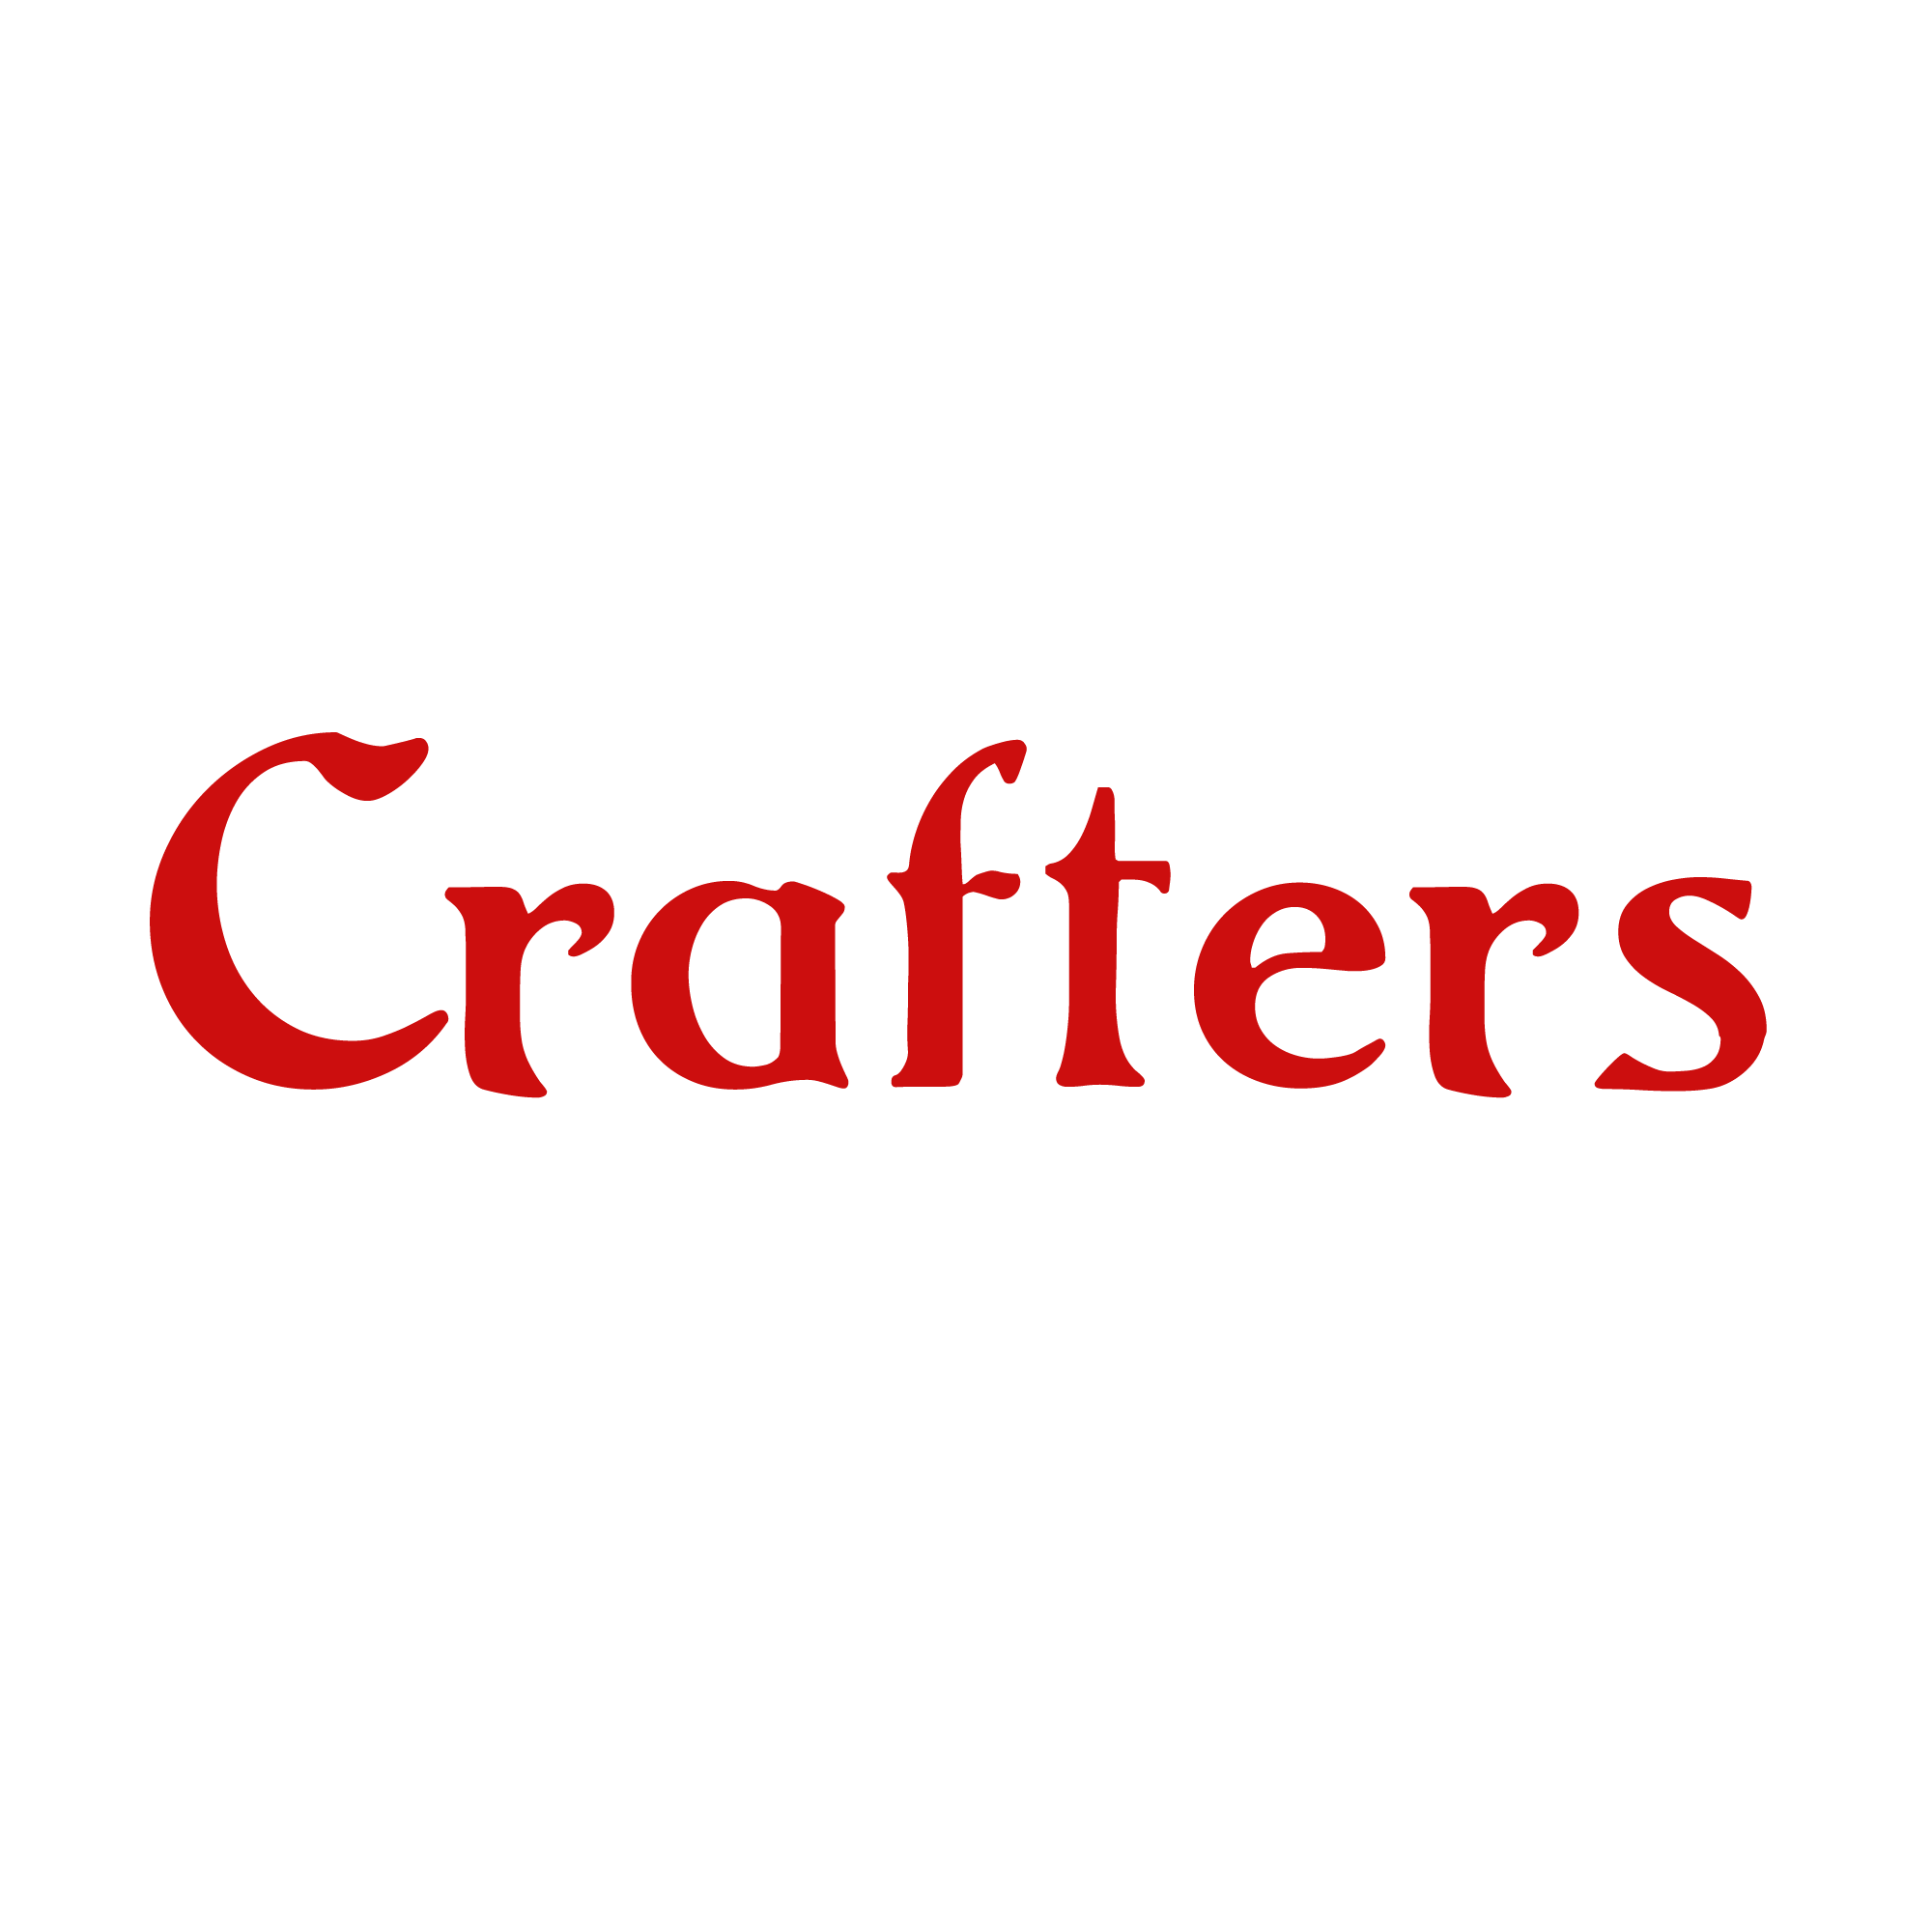      - Crafters   ,   ,    - Crafters
